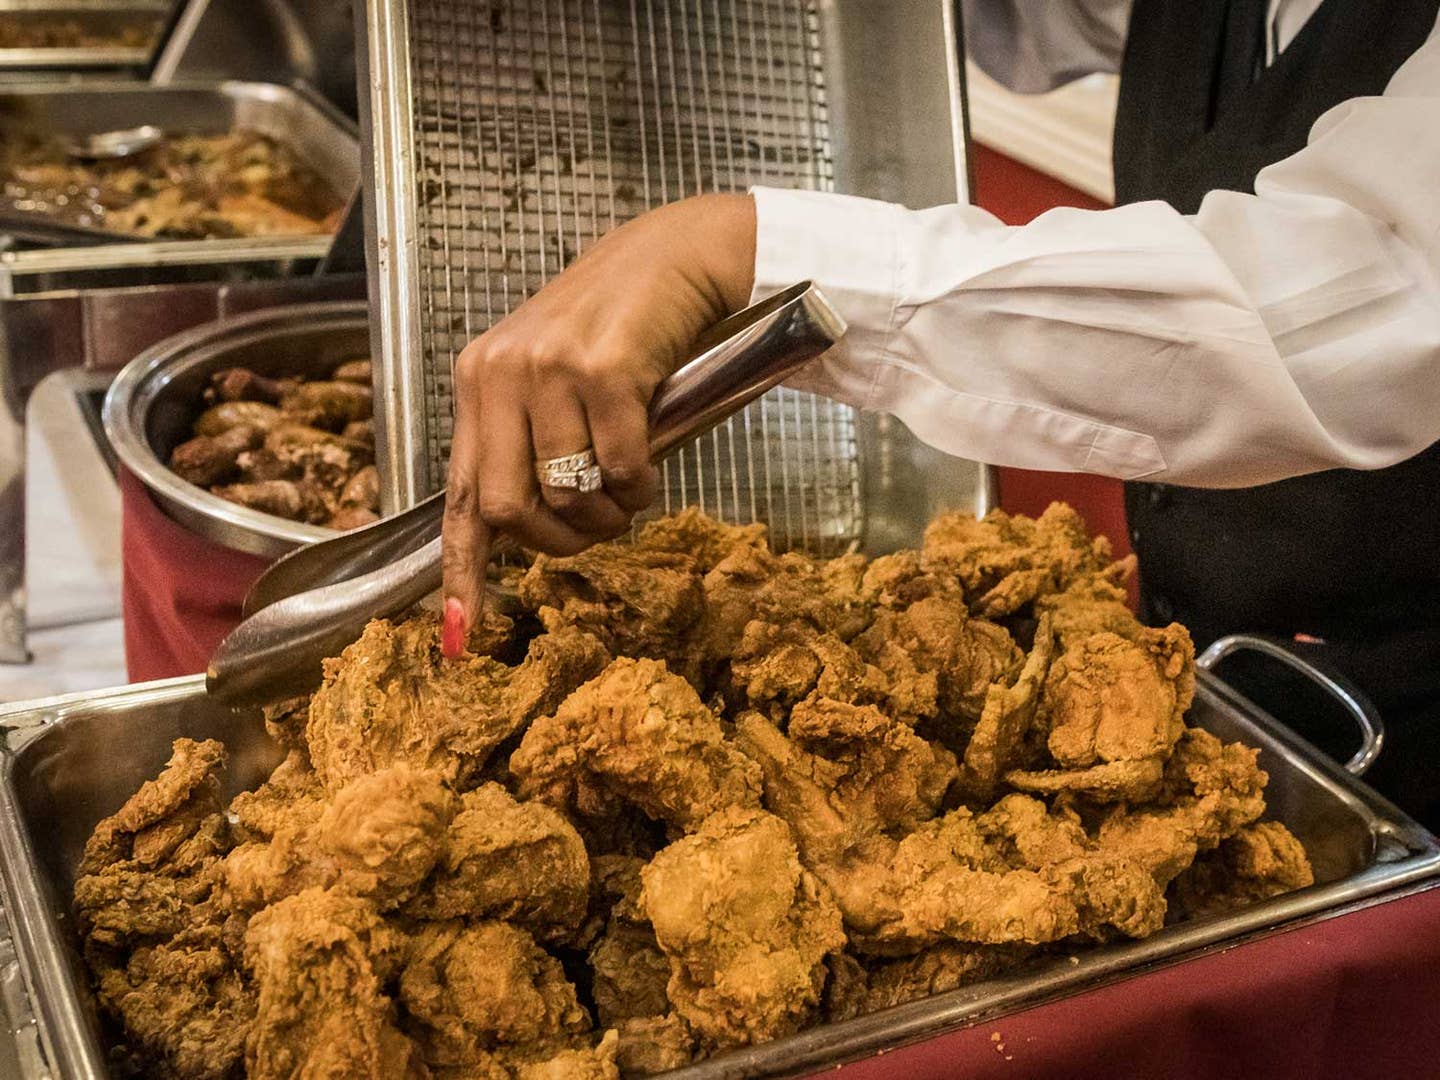 Lunch At This Iconic New Orleans Restaurant Includes a Fried Chicken Avalanche